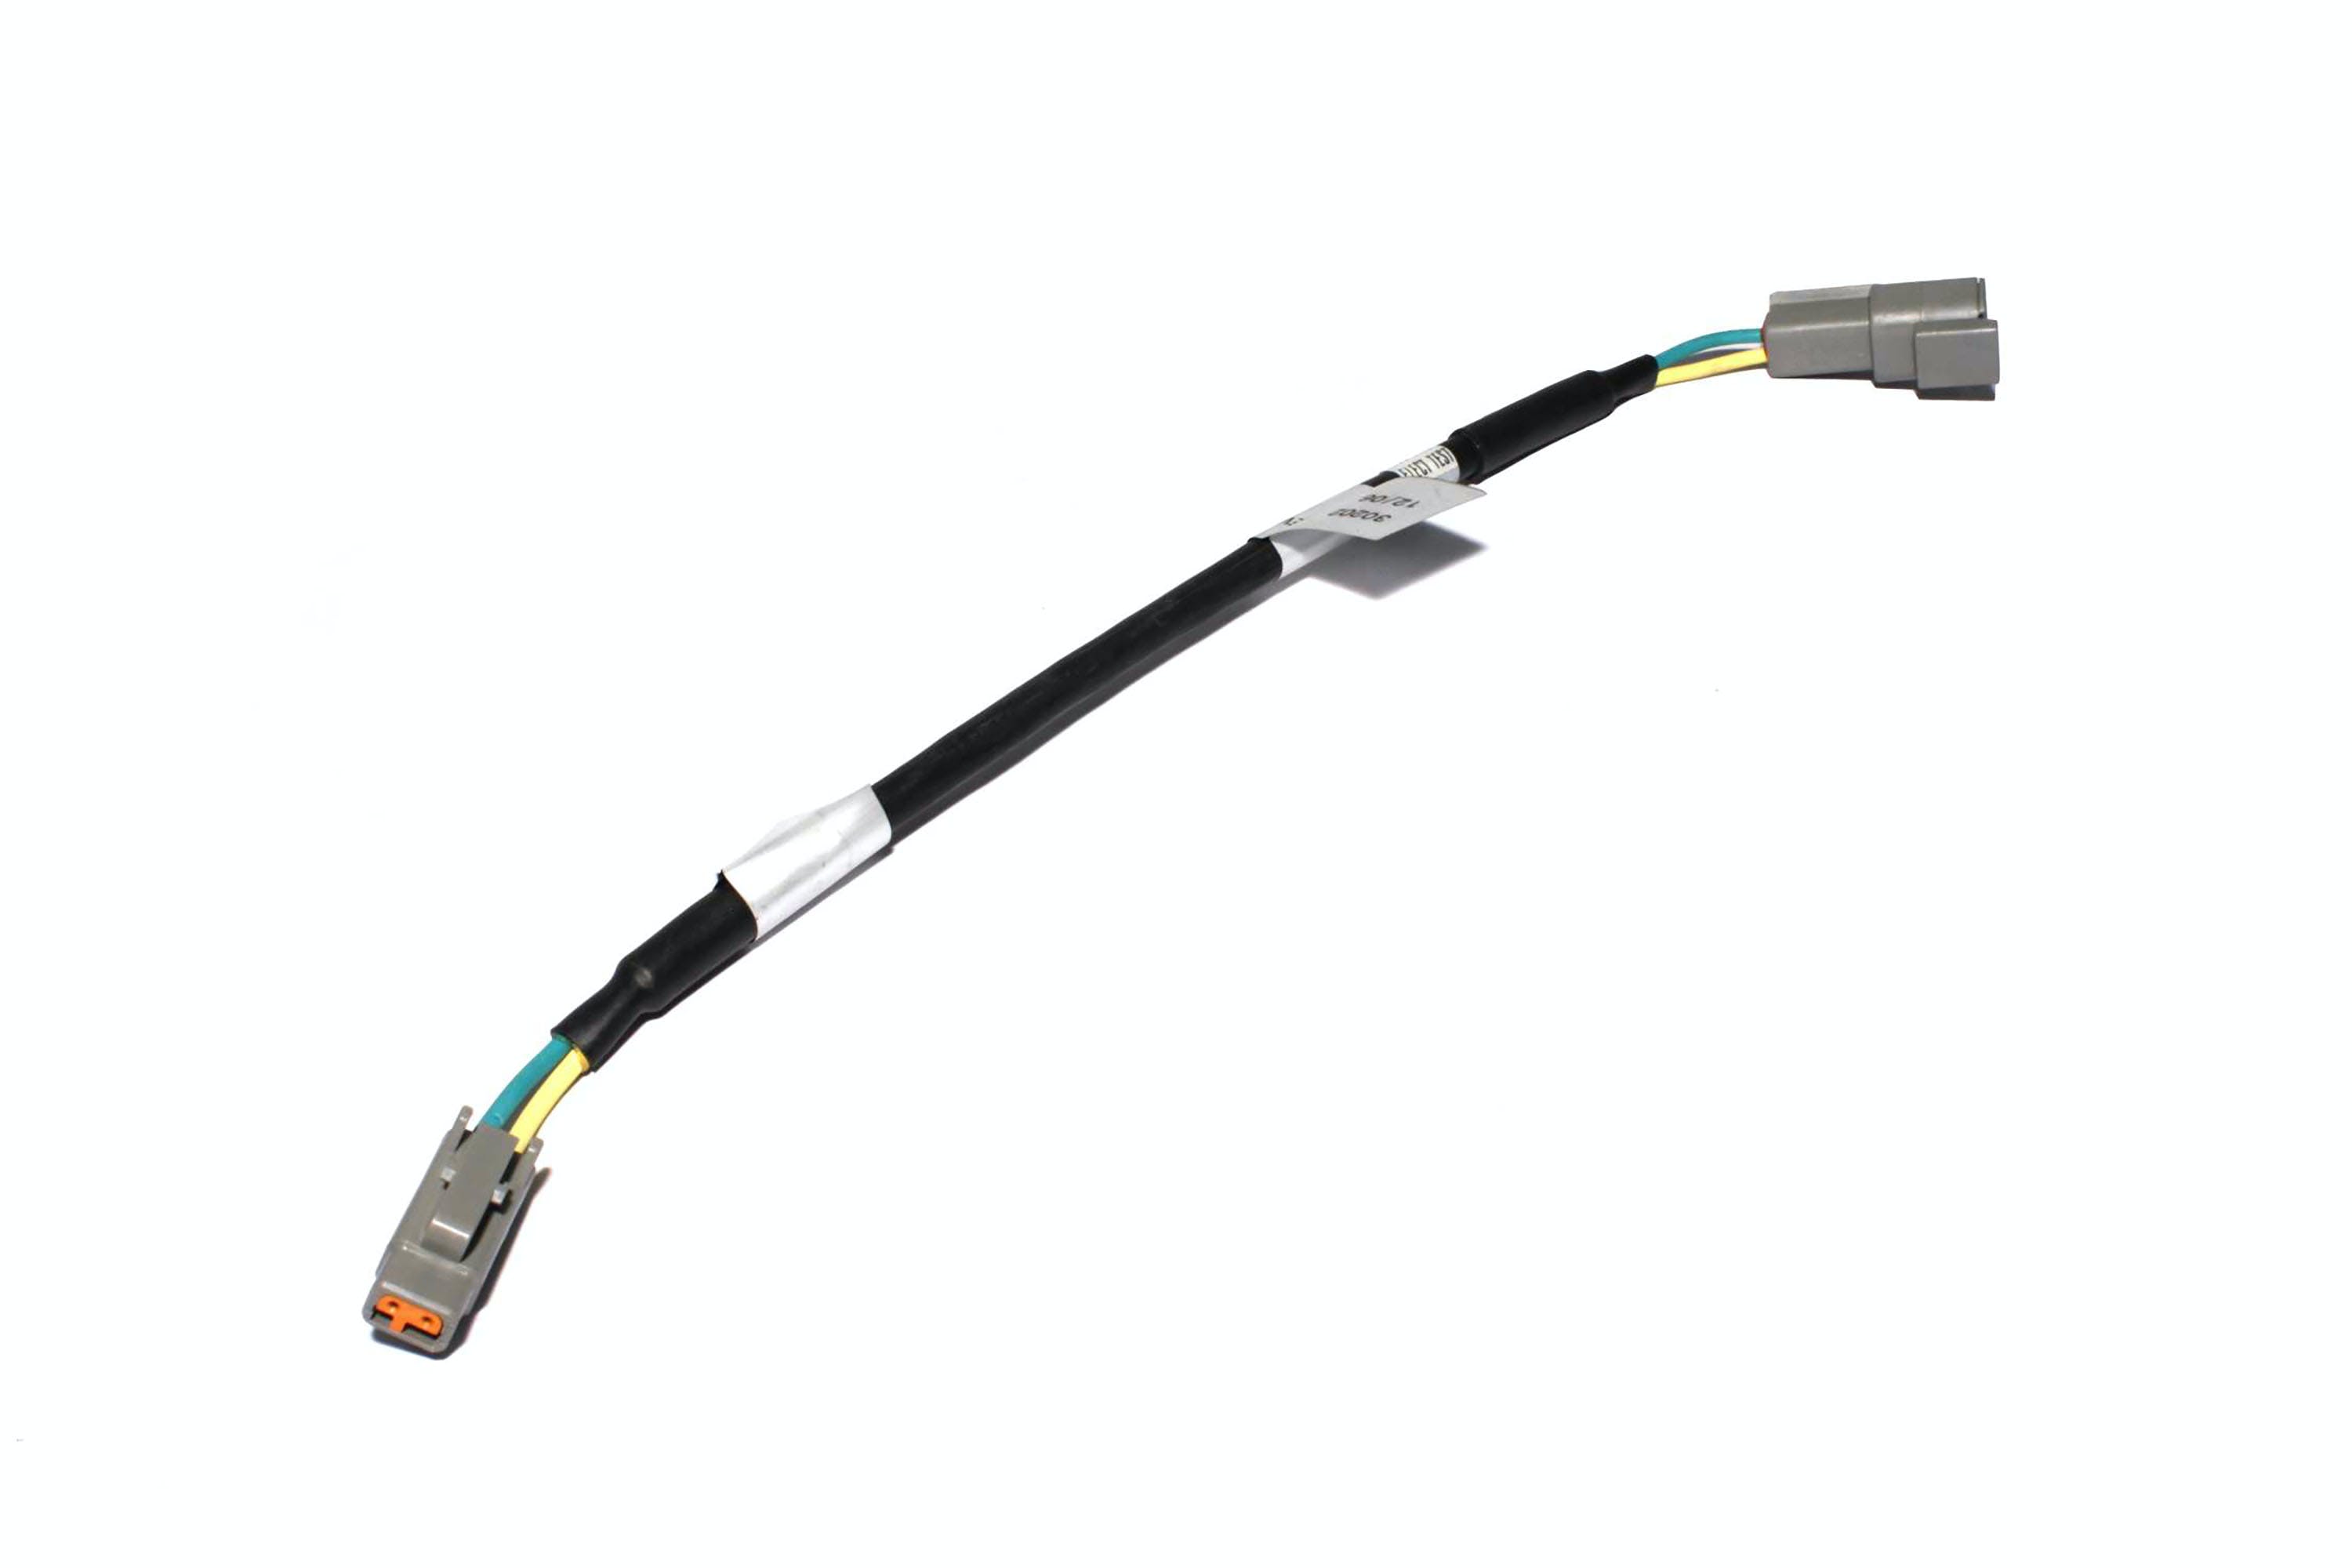 FAST - Fuel Air Spark Technology 301413 Can Interconnect Cable